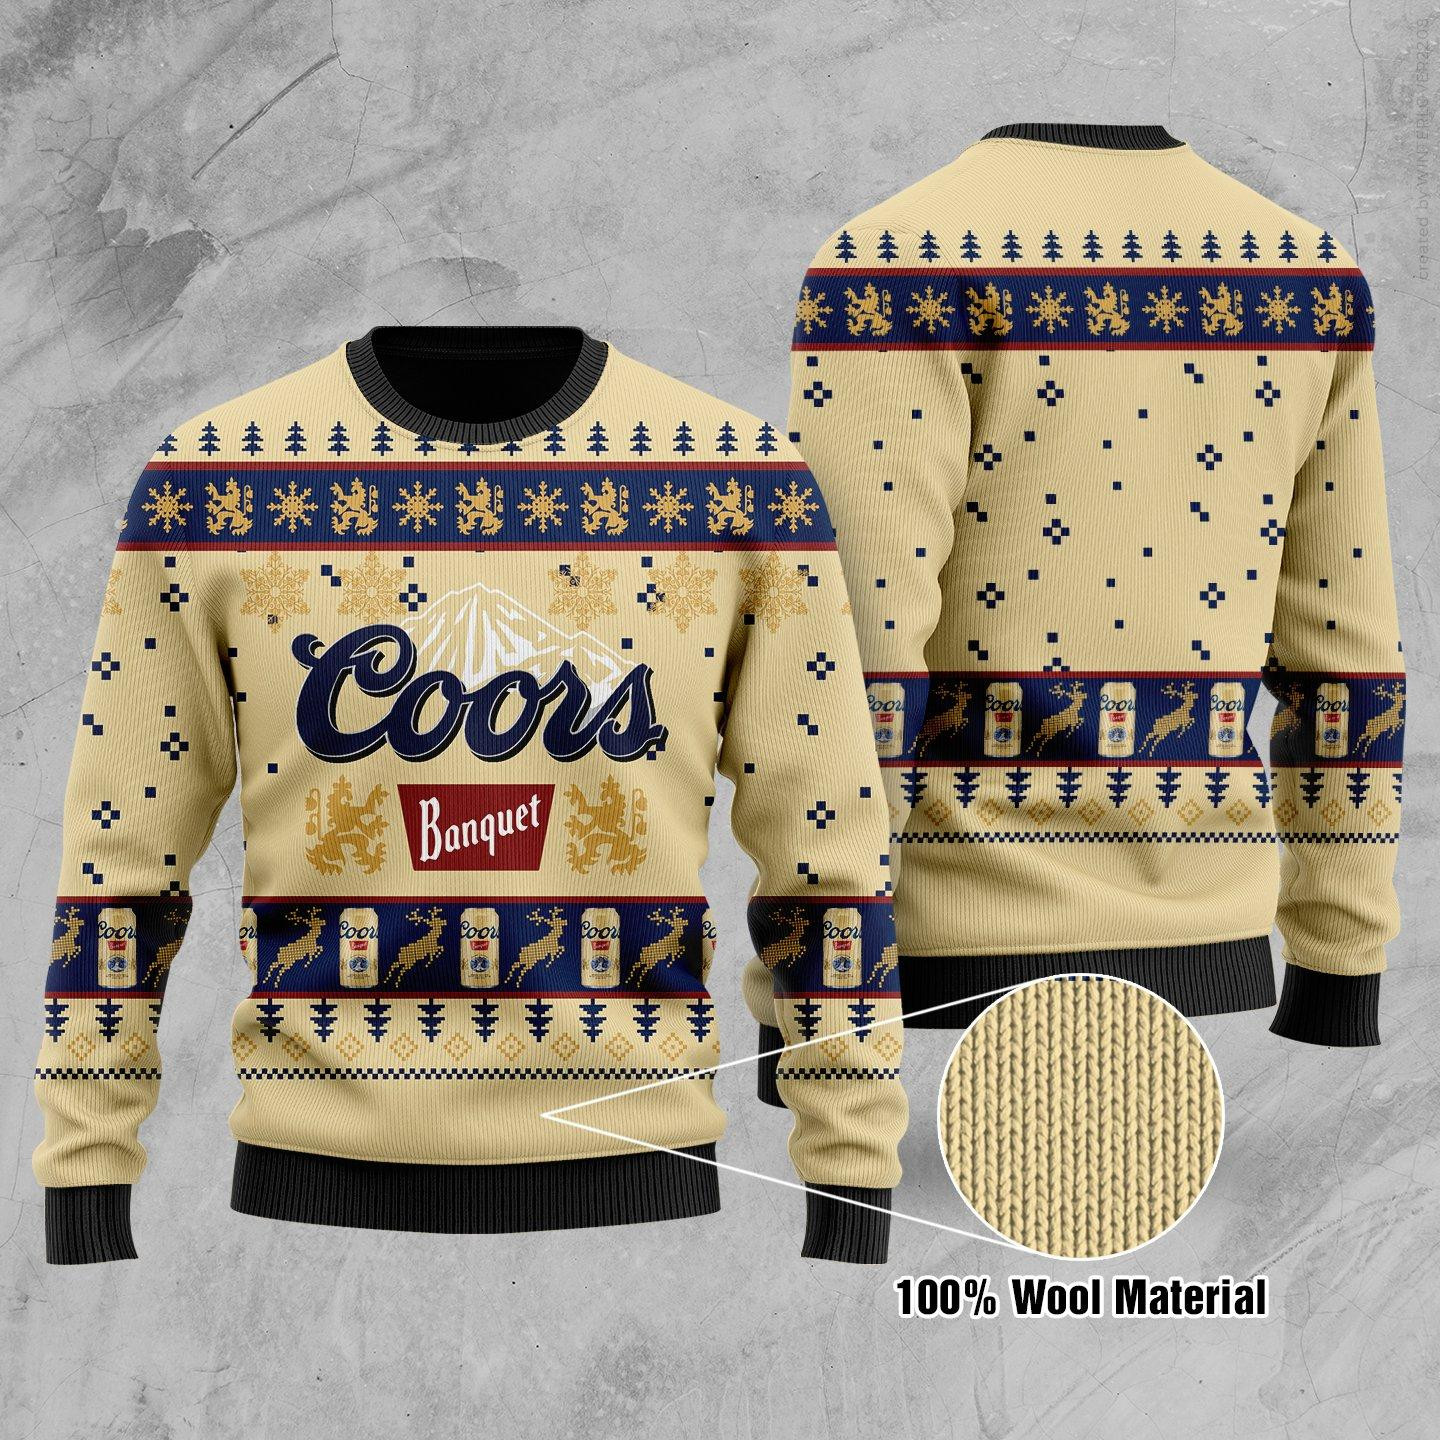 Coors Banquet 3D Printed Sweatshirt - Teehall - Live Creatively